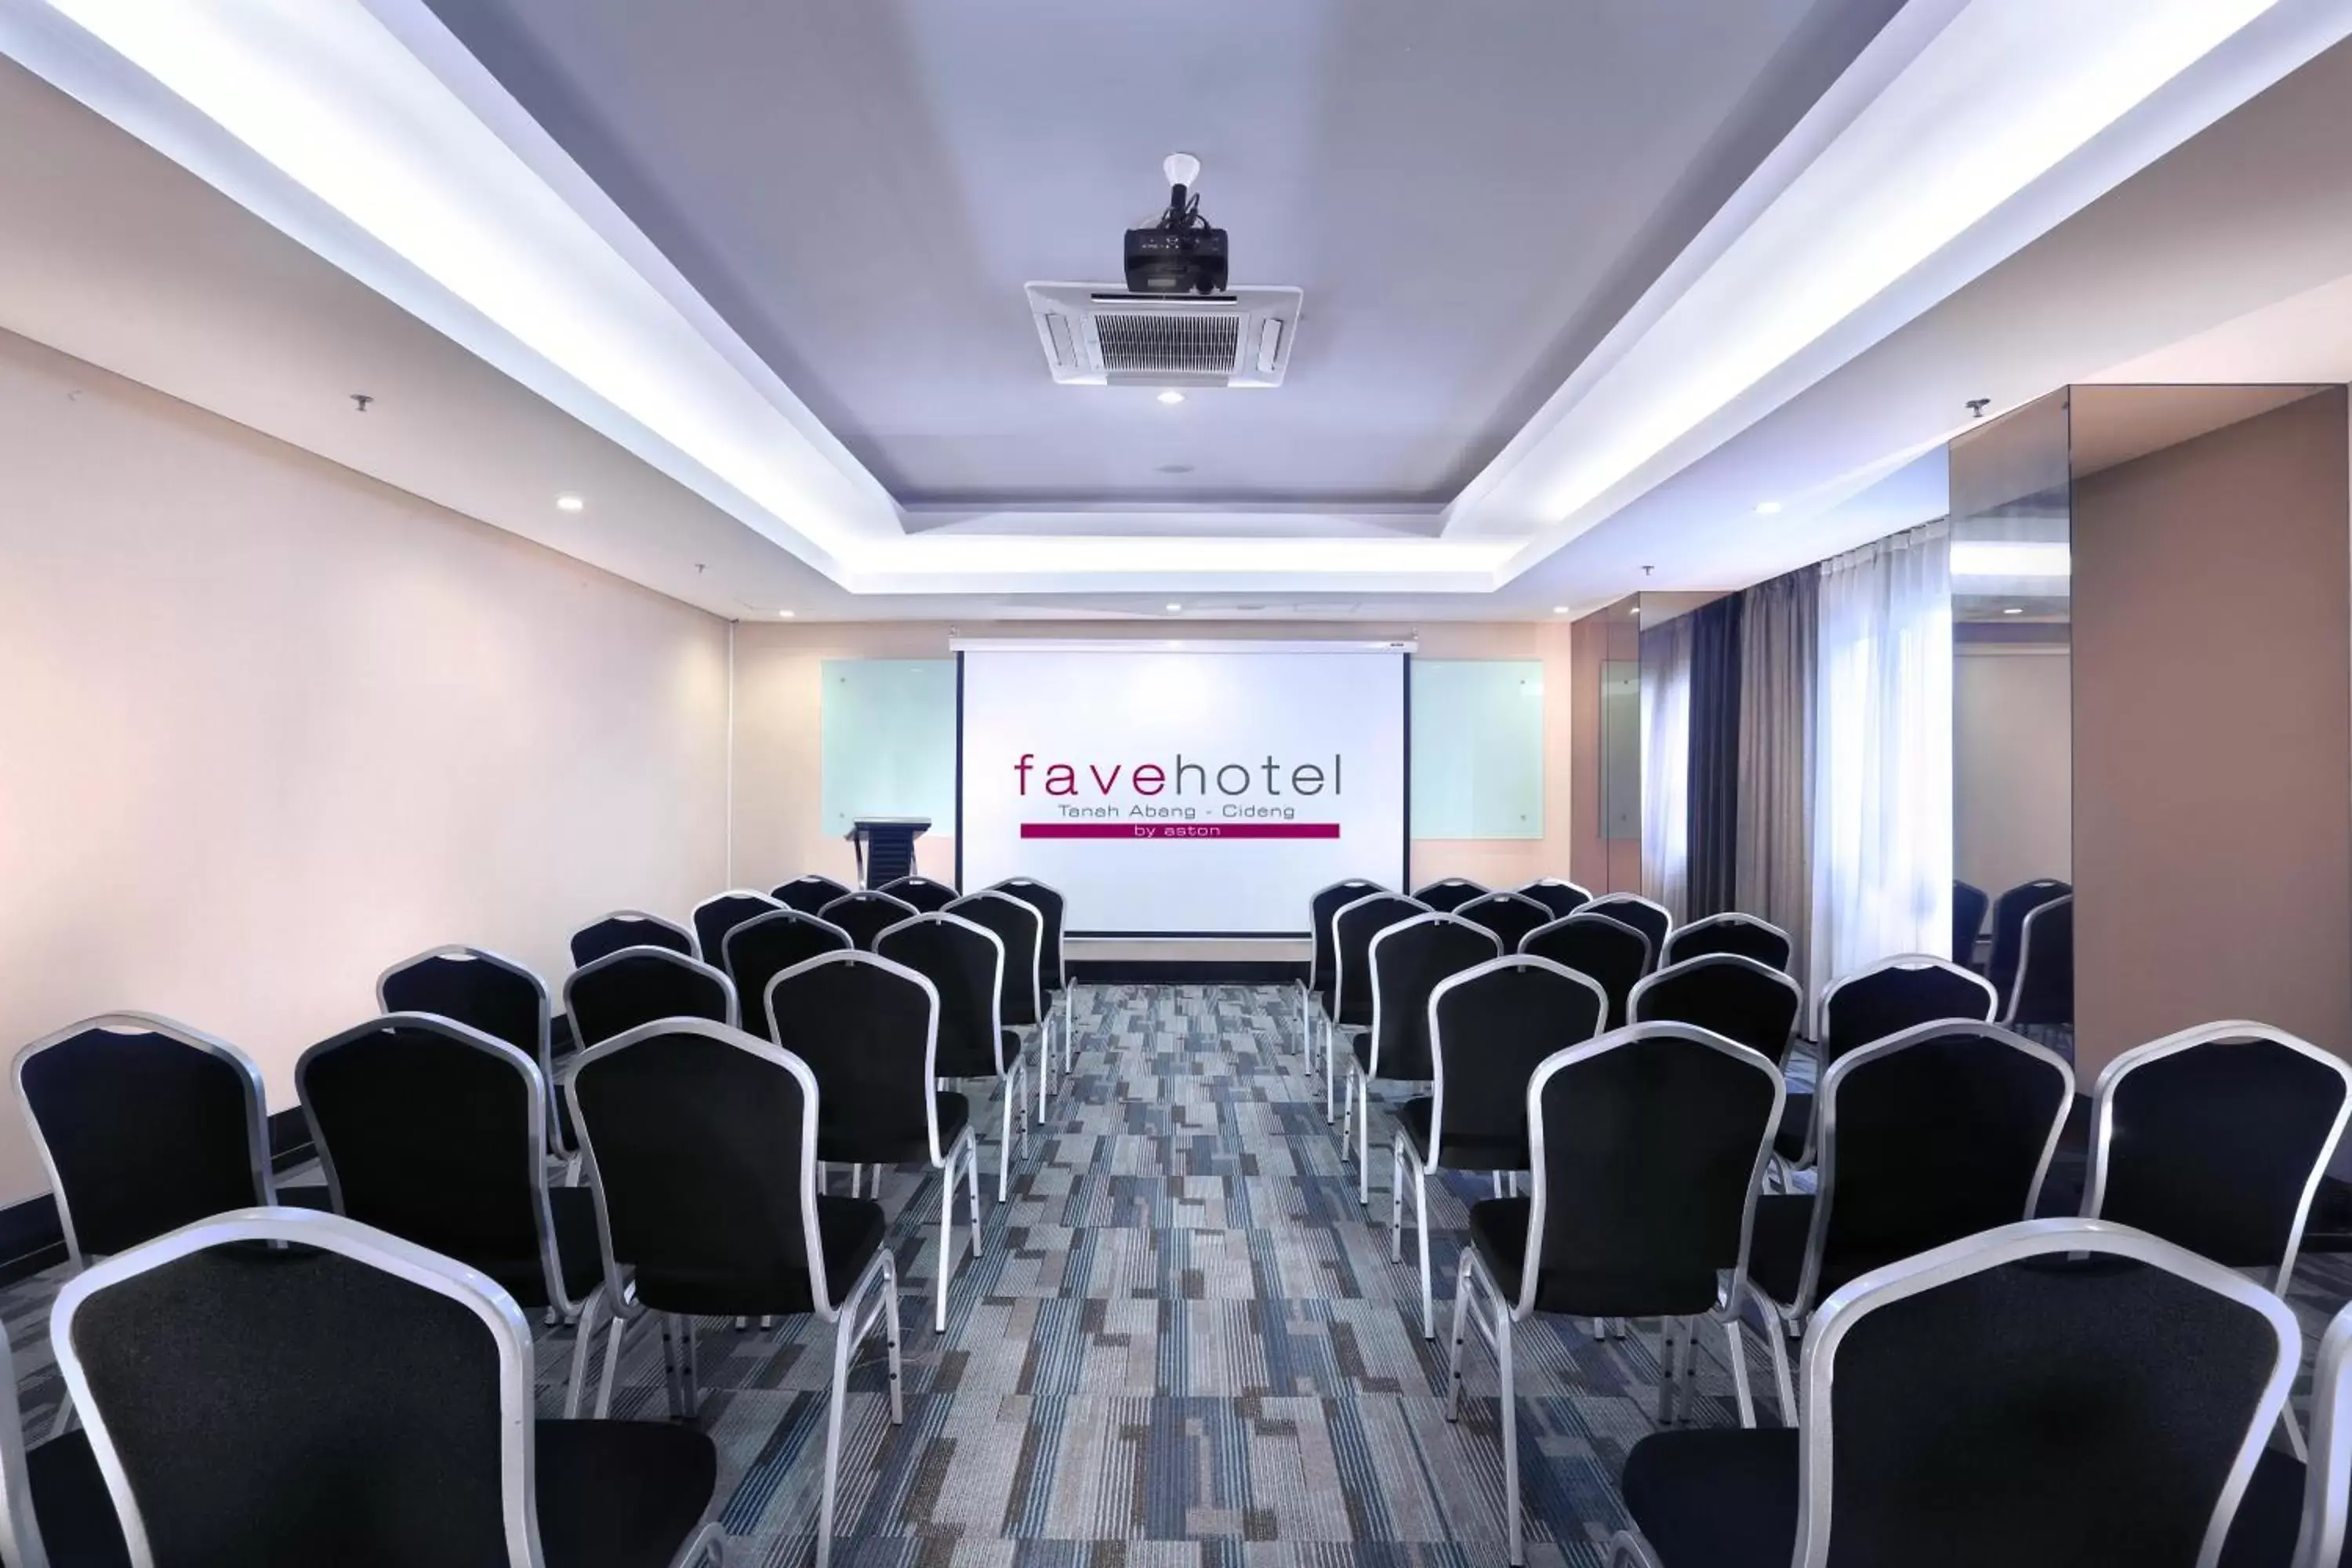 Meeting/conference room in favehotel Tanah Abang - Cideng